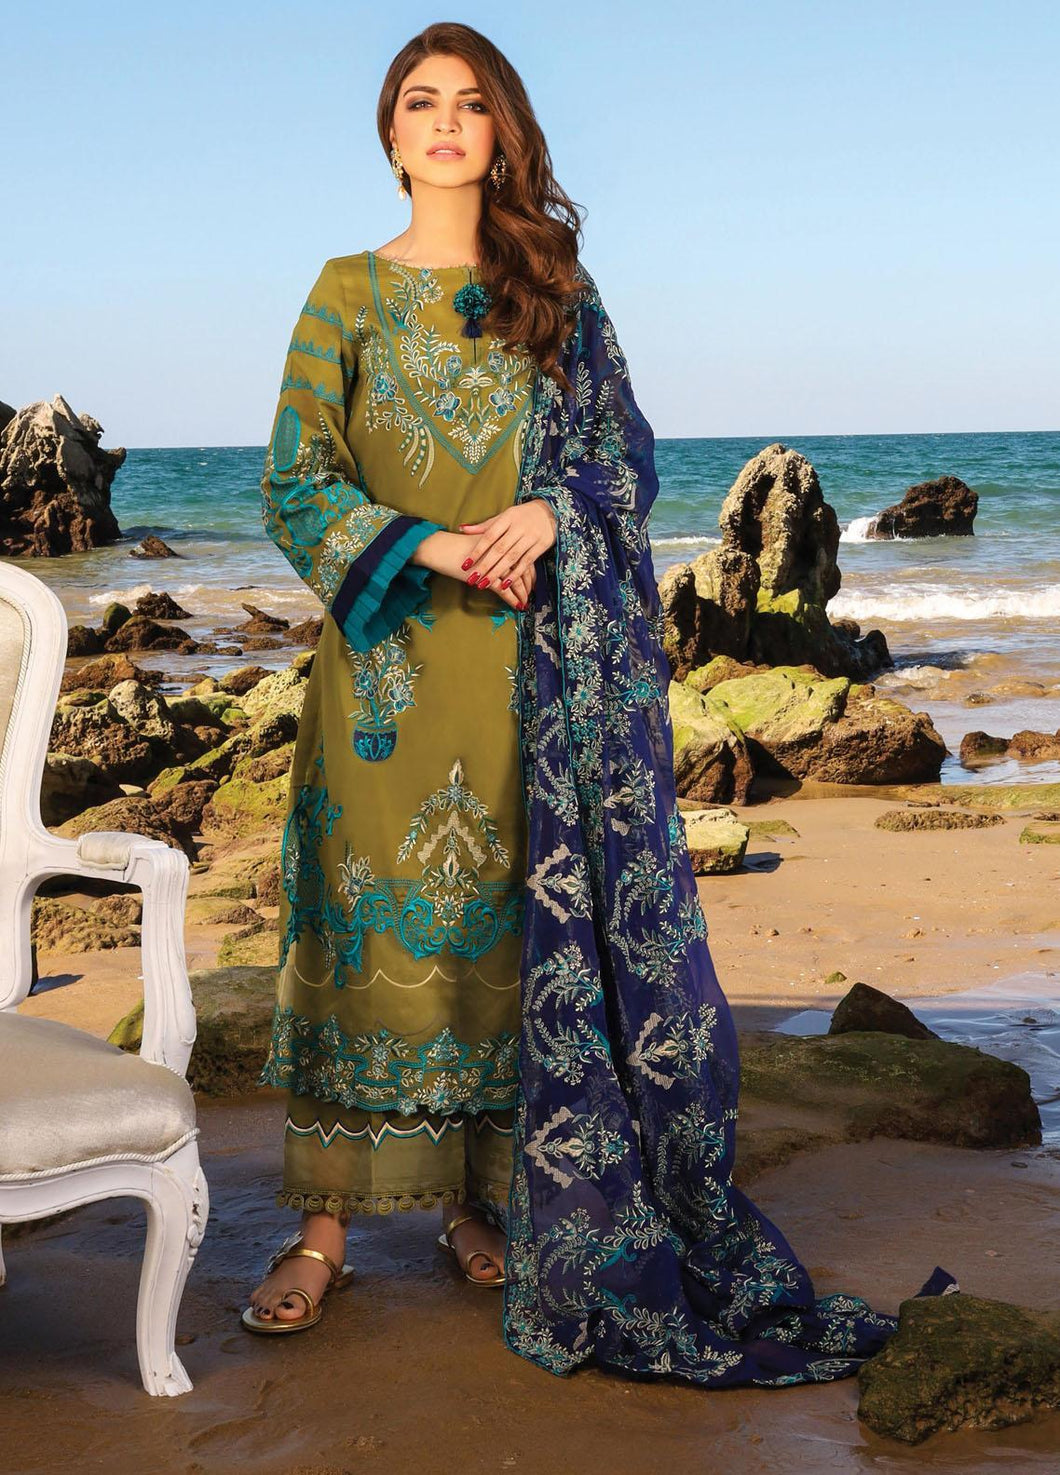 Buy Imrozia Luxury Lawn 2021 I.S.L-06 Olivgrun Green dress from LebaasOnline The IMROZIA COLLECTION, Maria B Lawn, Maria b MPrints, Gulal wedding collection Evening and casual wear dresses are more prominent these days Buy IMROZIA CHIFFON at IMROZIA PAKISTANI DRESSES from LebaasOnline in UK & USA ate best prices!